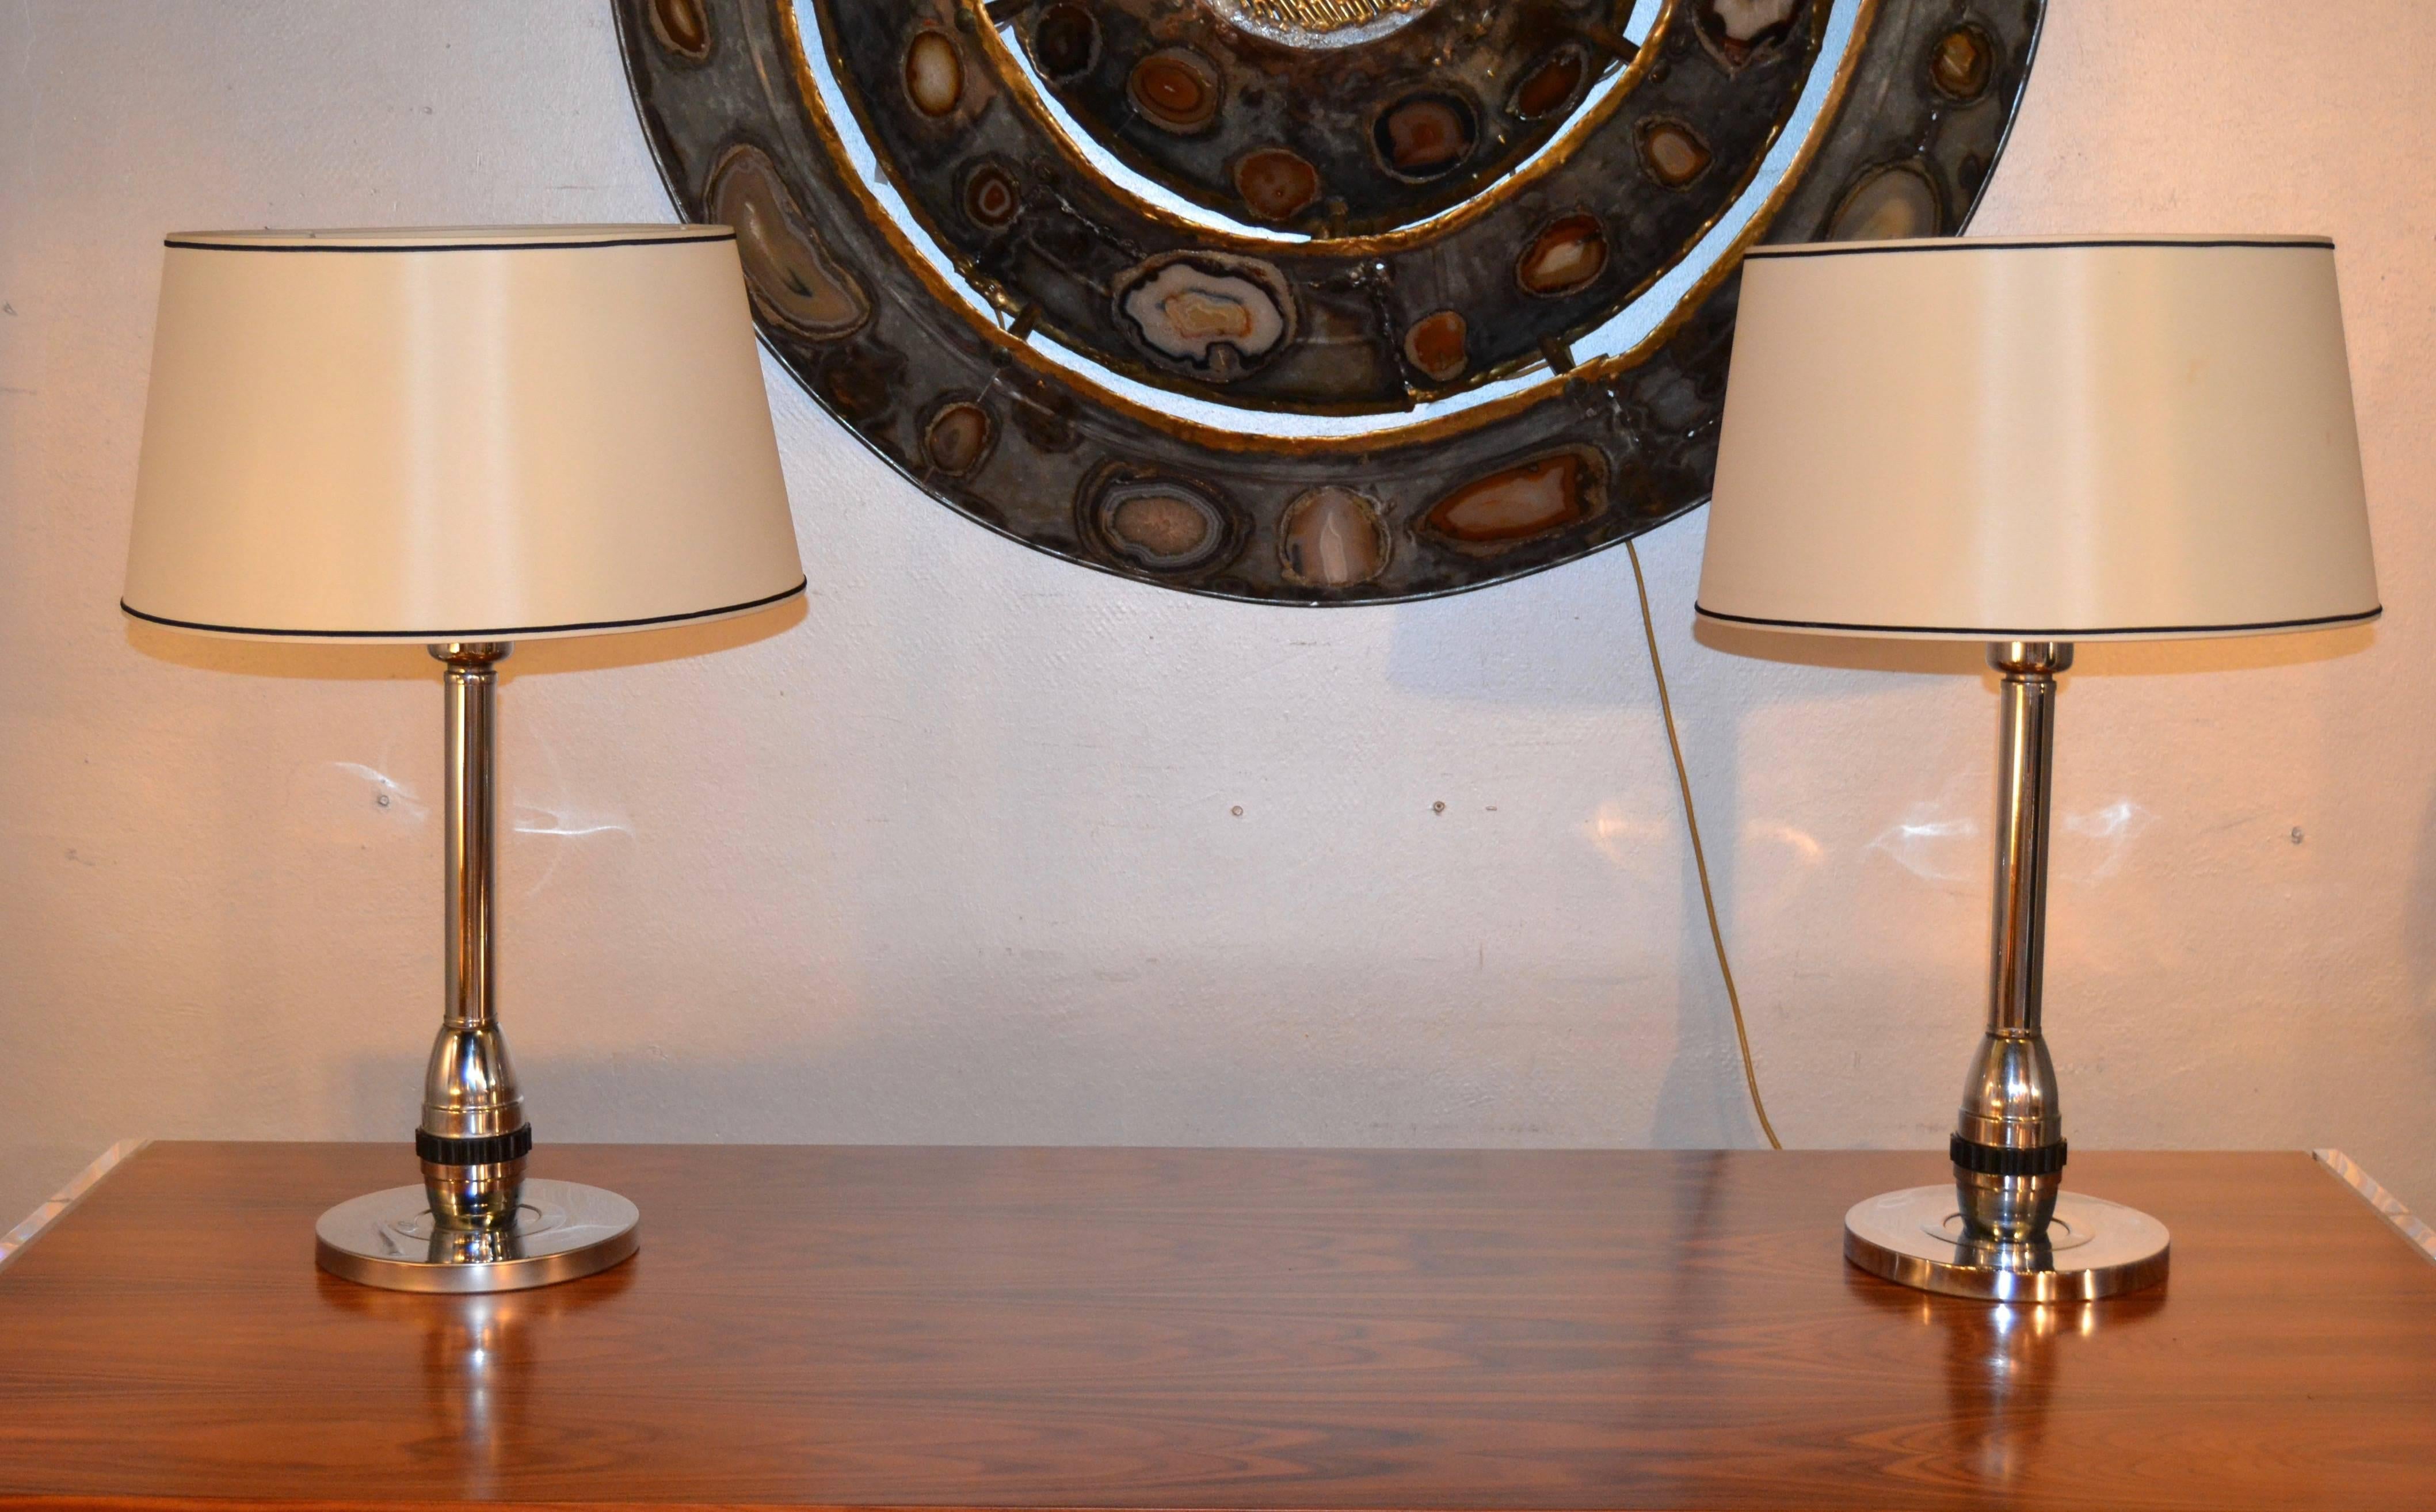 Pair of chromed steel lamps with bakelite dimmer. Lamps has a dimmer inside turning the black bakelite switch, 1950s, France.
Good vintage condition
New shade.